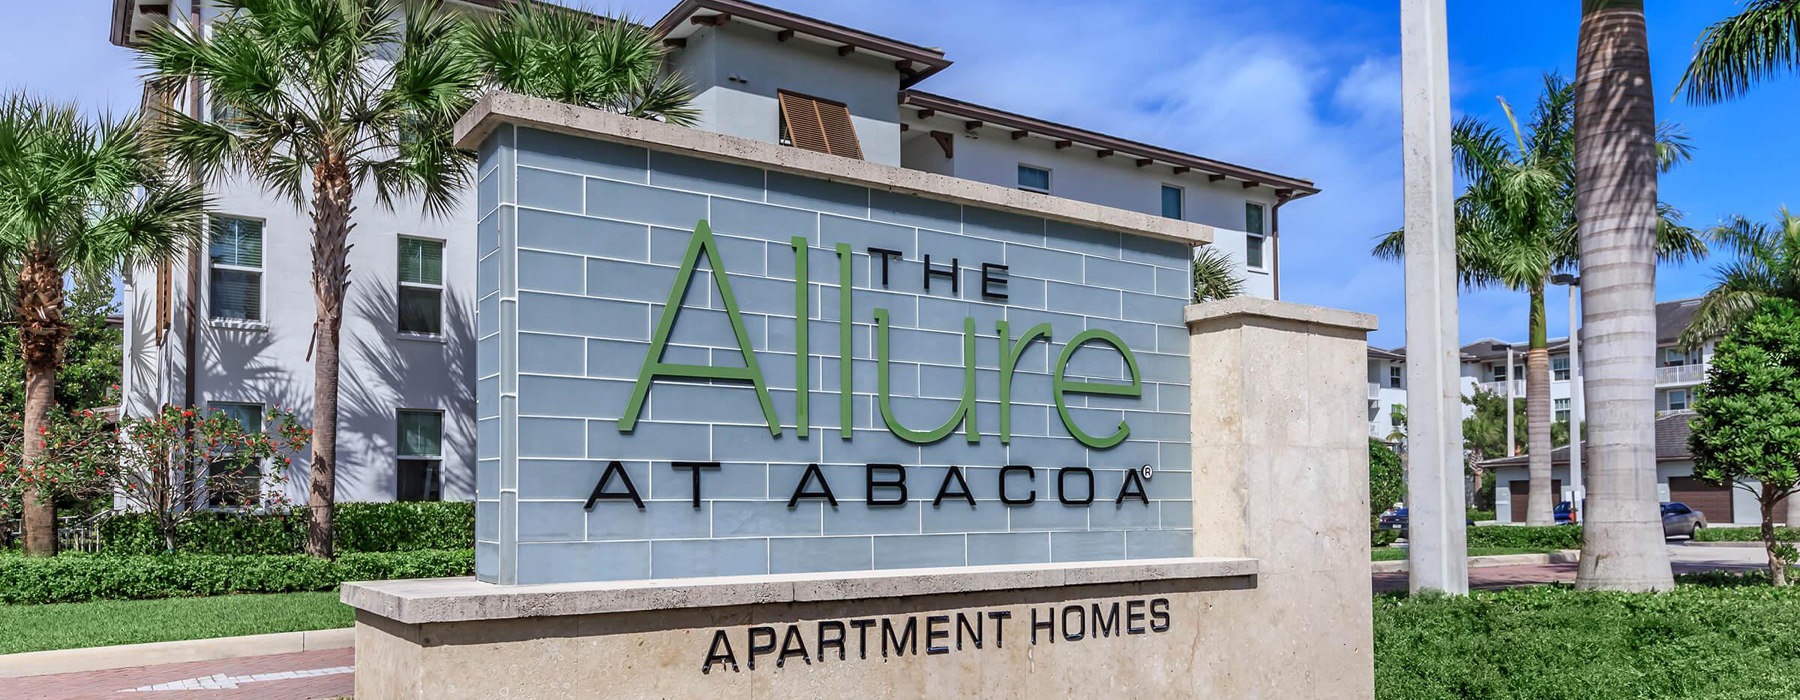 Allure at Abacoa Entrance